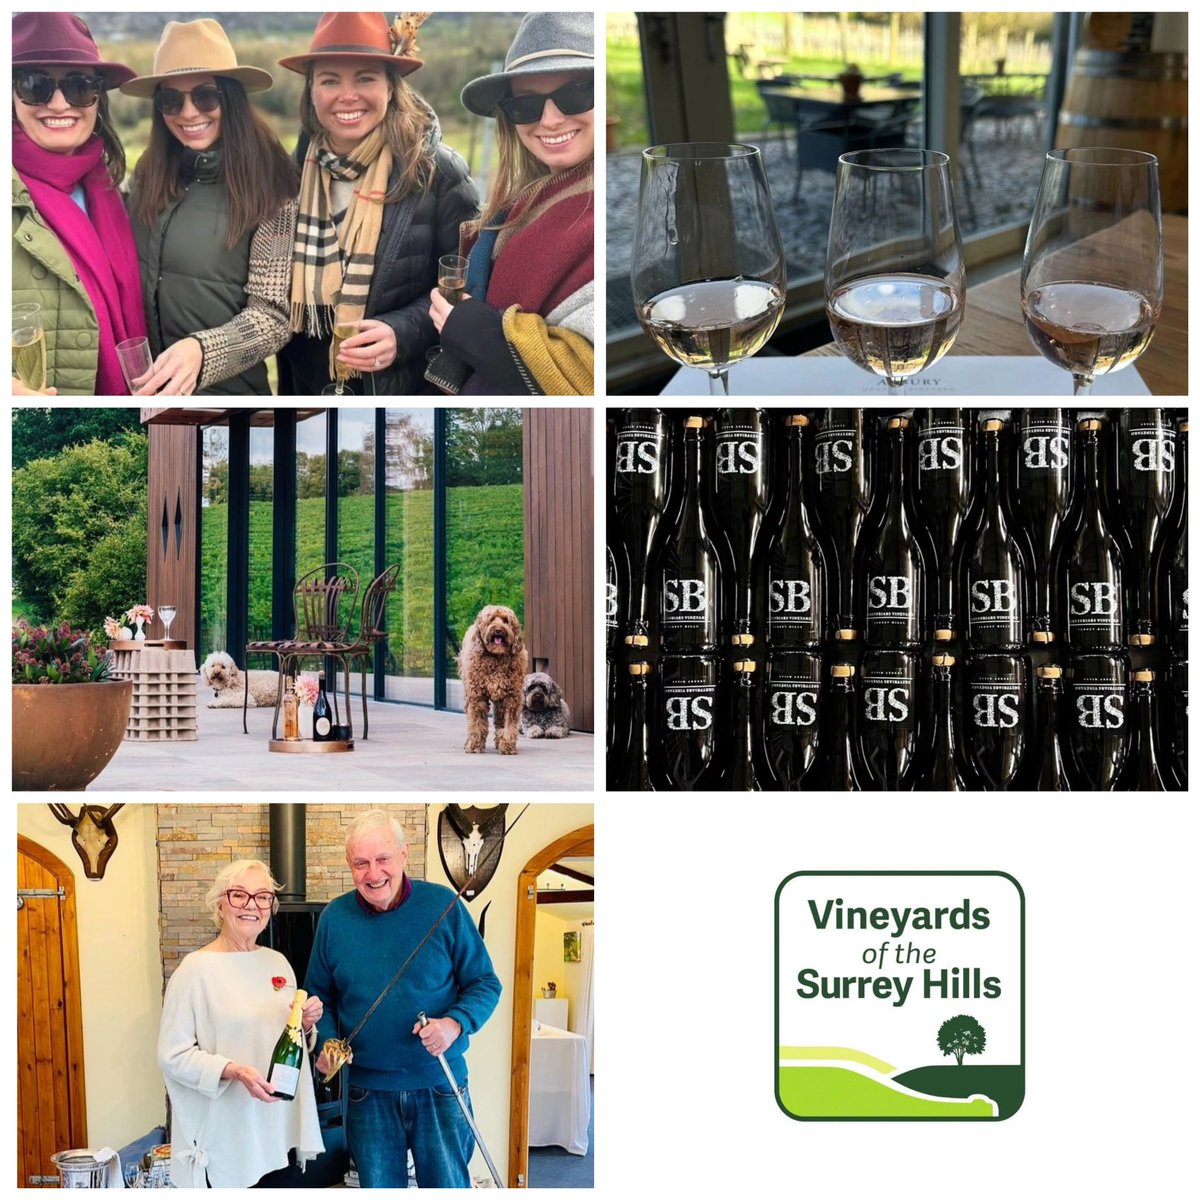 Top Picks! A selection of recent photos from our Vineyards of the Surrey Hills wine route - check out our Instagram for full details. Do make sure to share your shots with us when visiting, too. 📸🥂😊